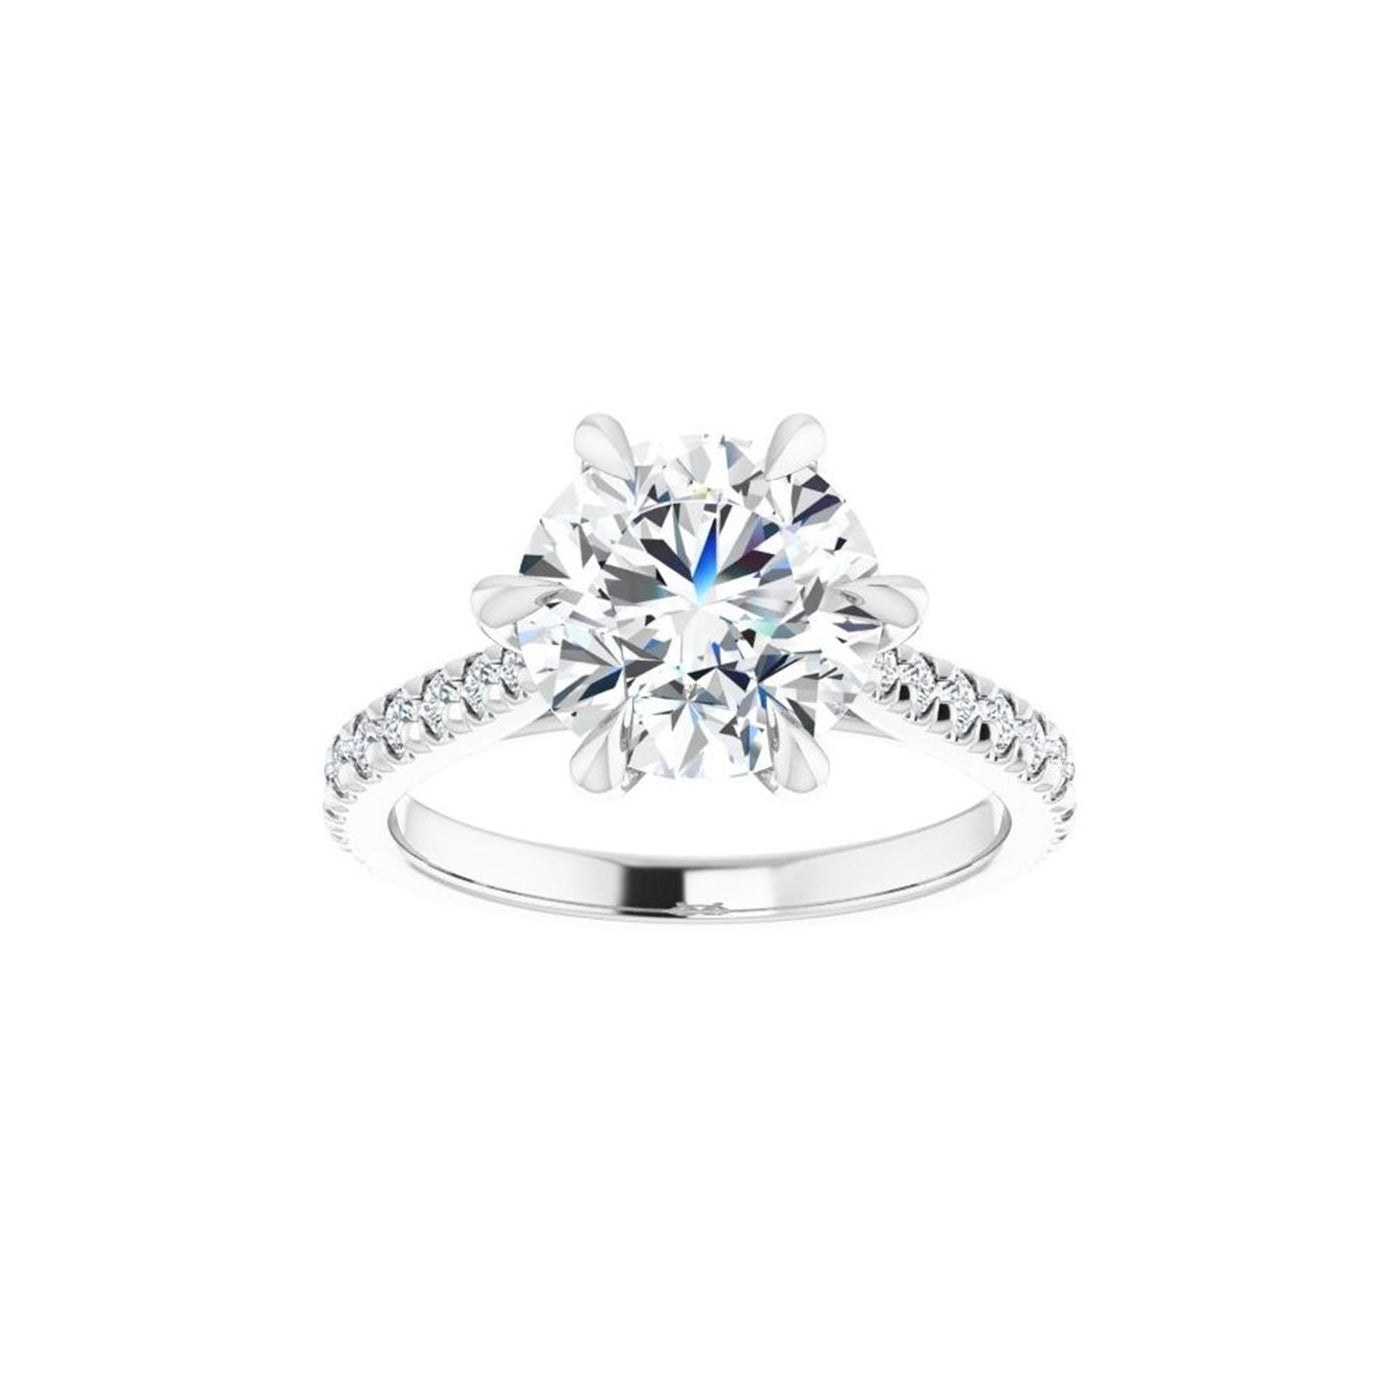 Ever & Ever 14K White Gold .40ctw 6 Prong Style Diamond Semi-Mount Engagement Ring